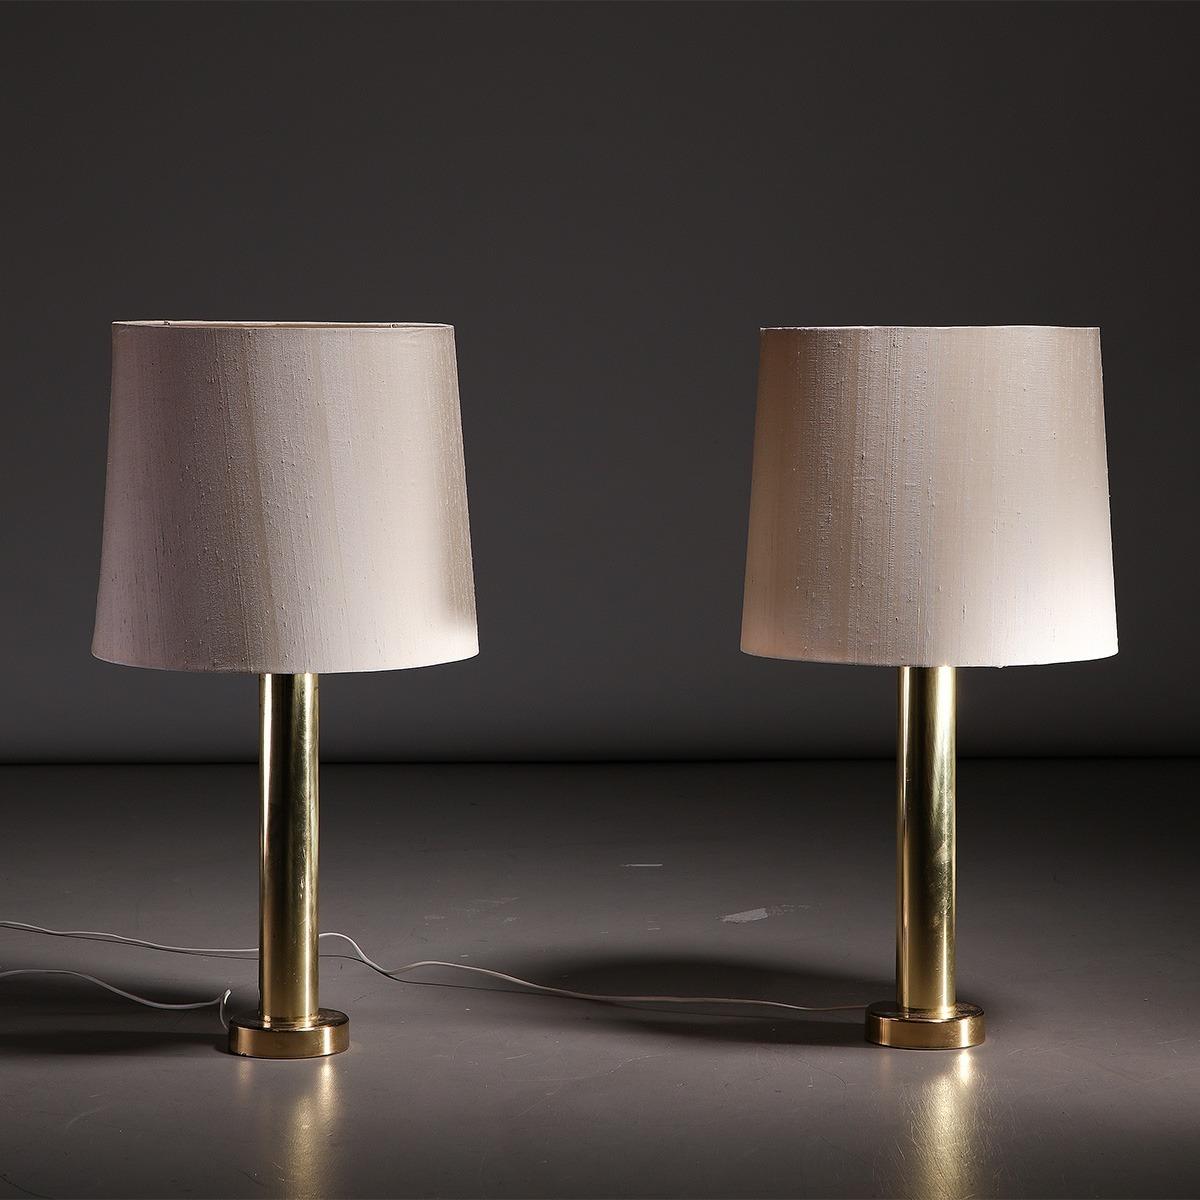 Pair of large mid-century Swedish brass and cotton table lamps made by Kosta Elarmatur in Sweden, 1970s.

These large and very elegant table lamps feature a tall brass stem and base, as well as a large cotton shade. They feature a very clean and